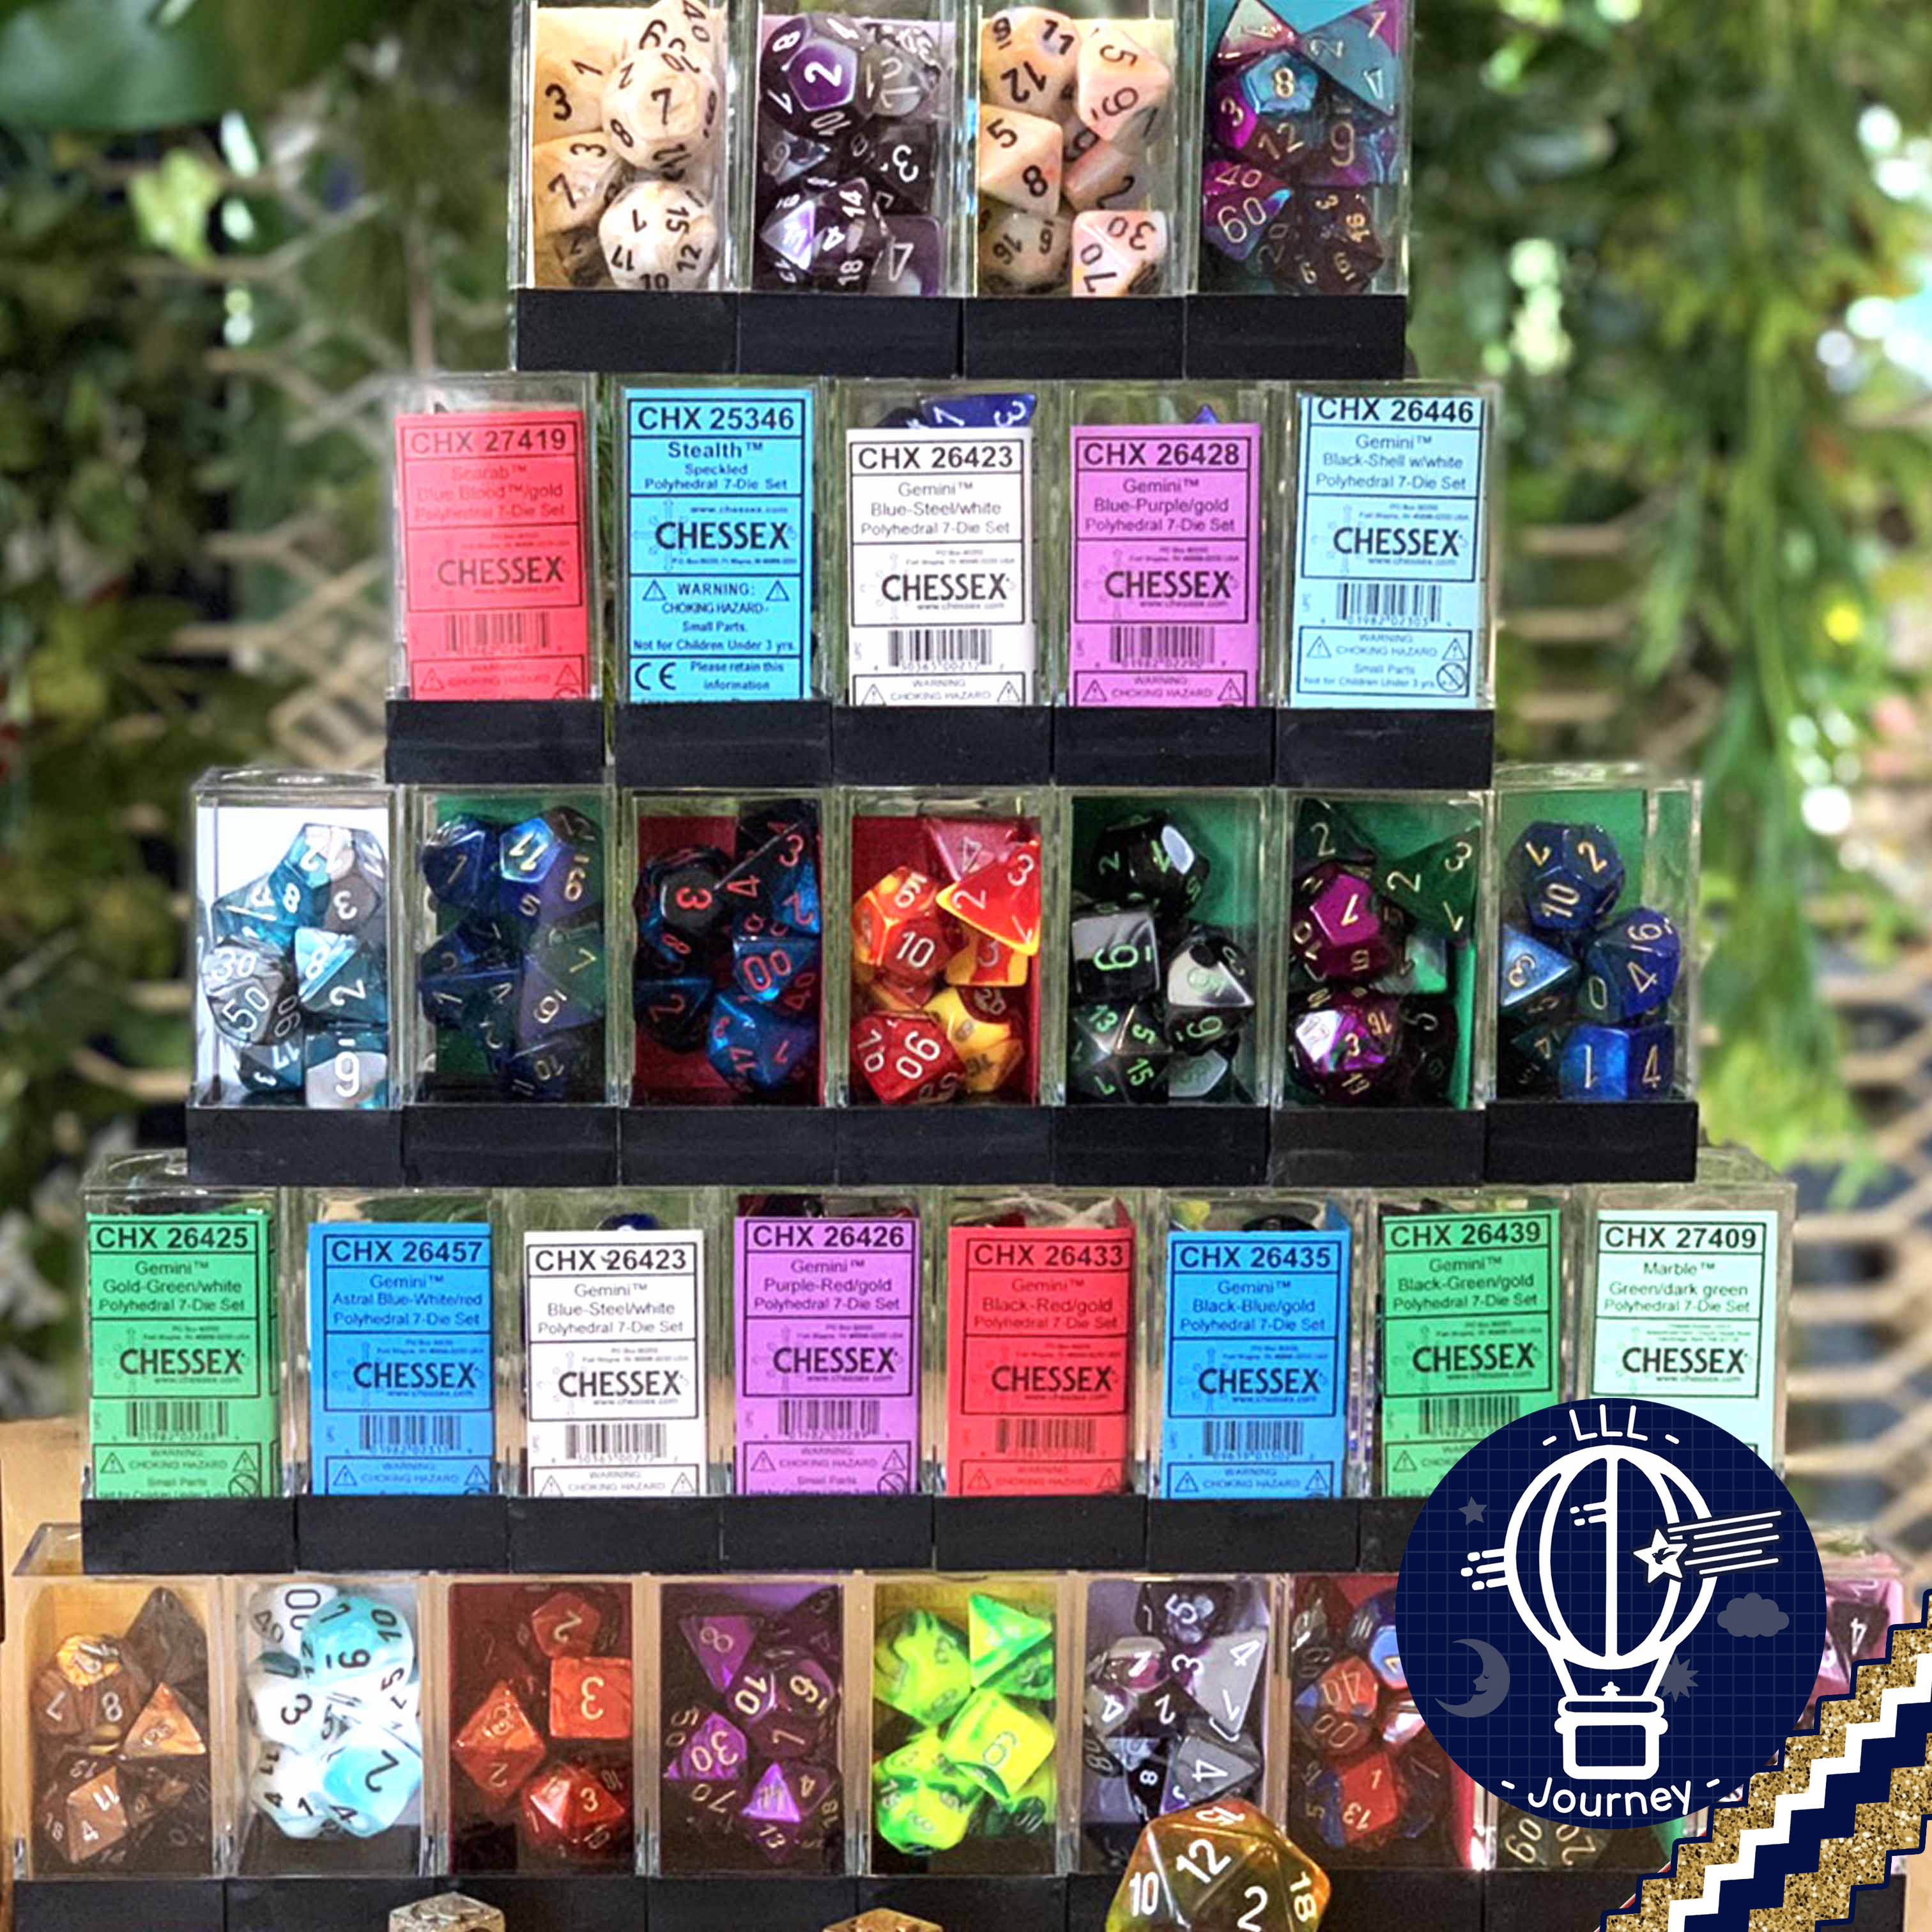 Chessex RPG Dice Polyhedral 7-Die Set ลูกเต๋าเซ็ต 7 ลูก [Accessory for Boardgame]